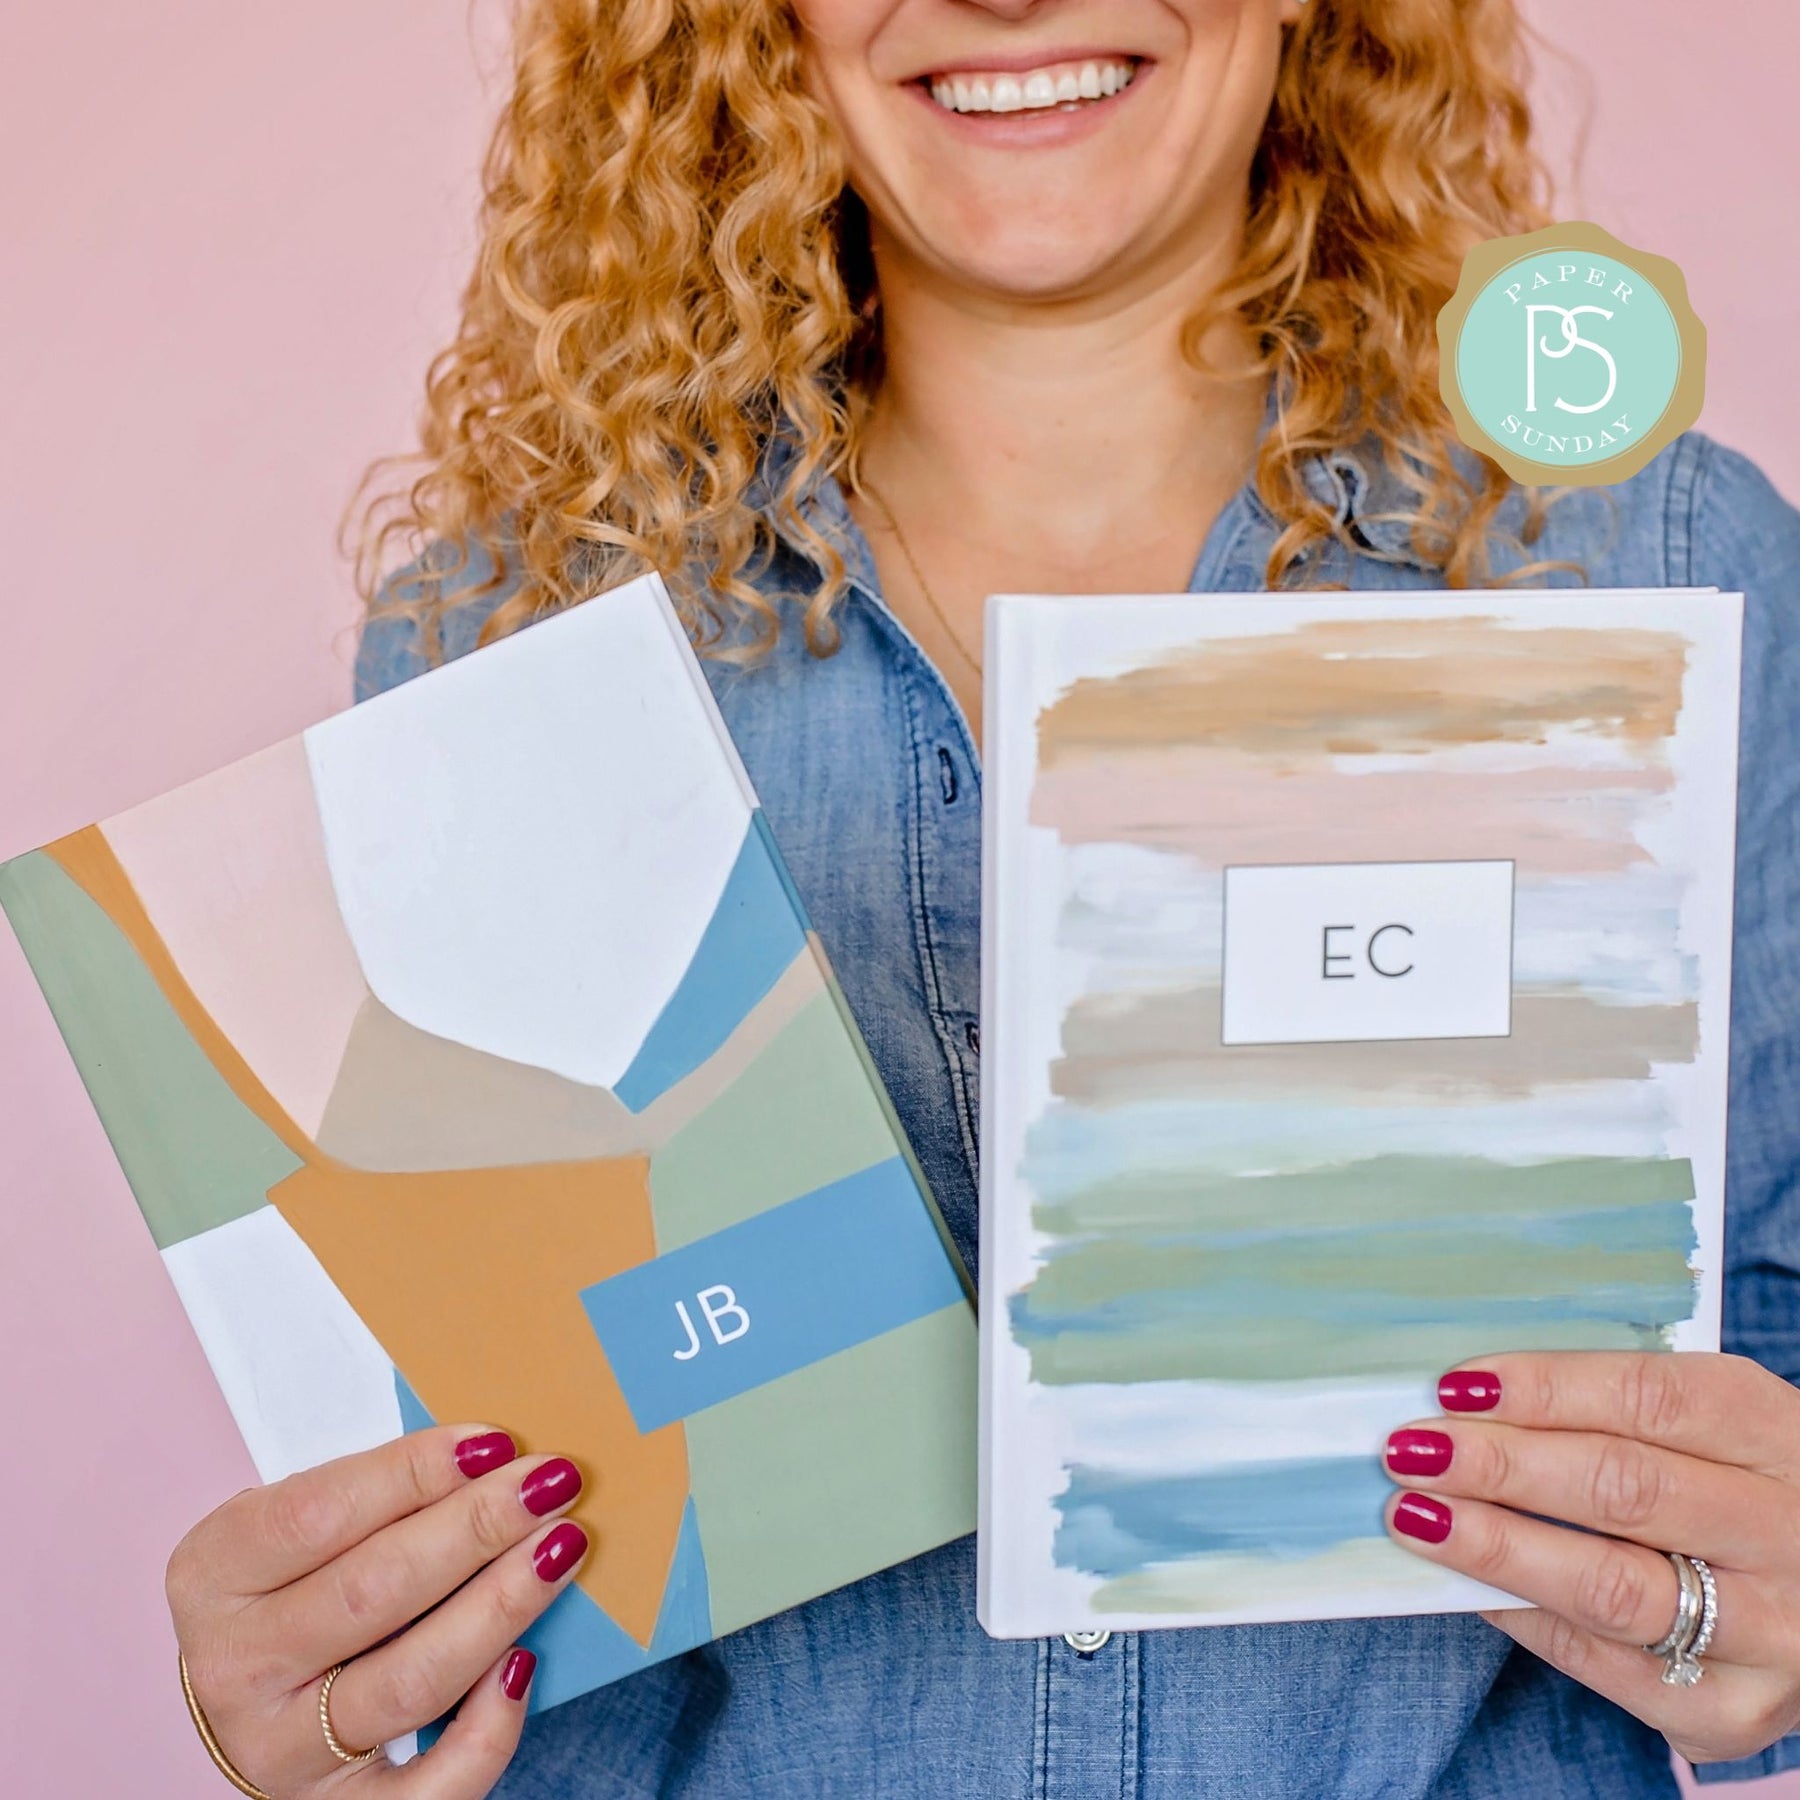 Perfectly Imperfect (Planner) by Heather Hostetter